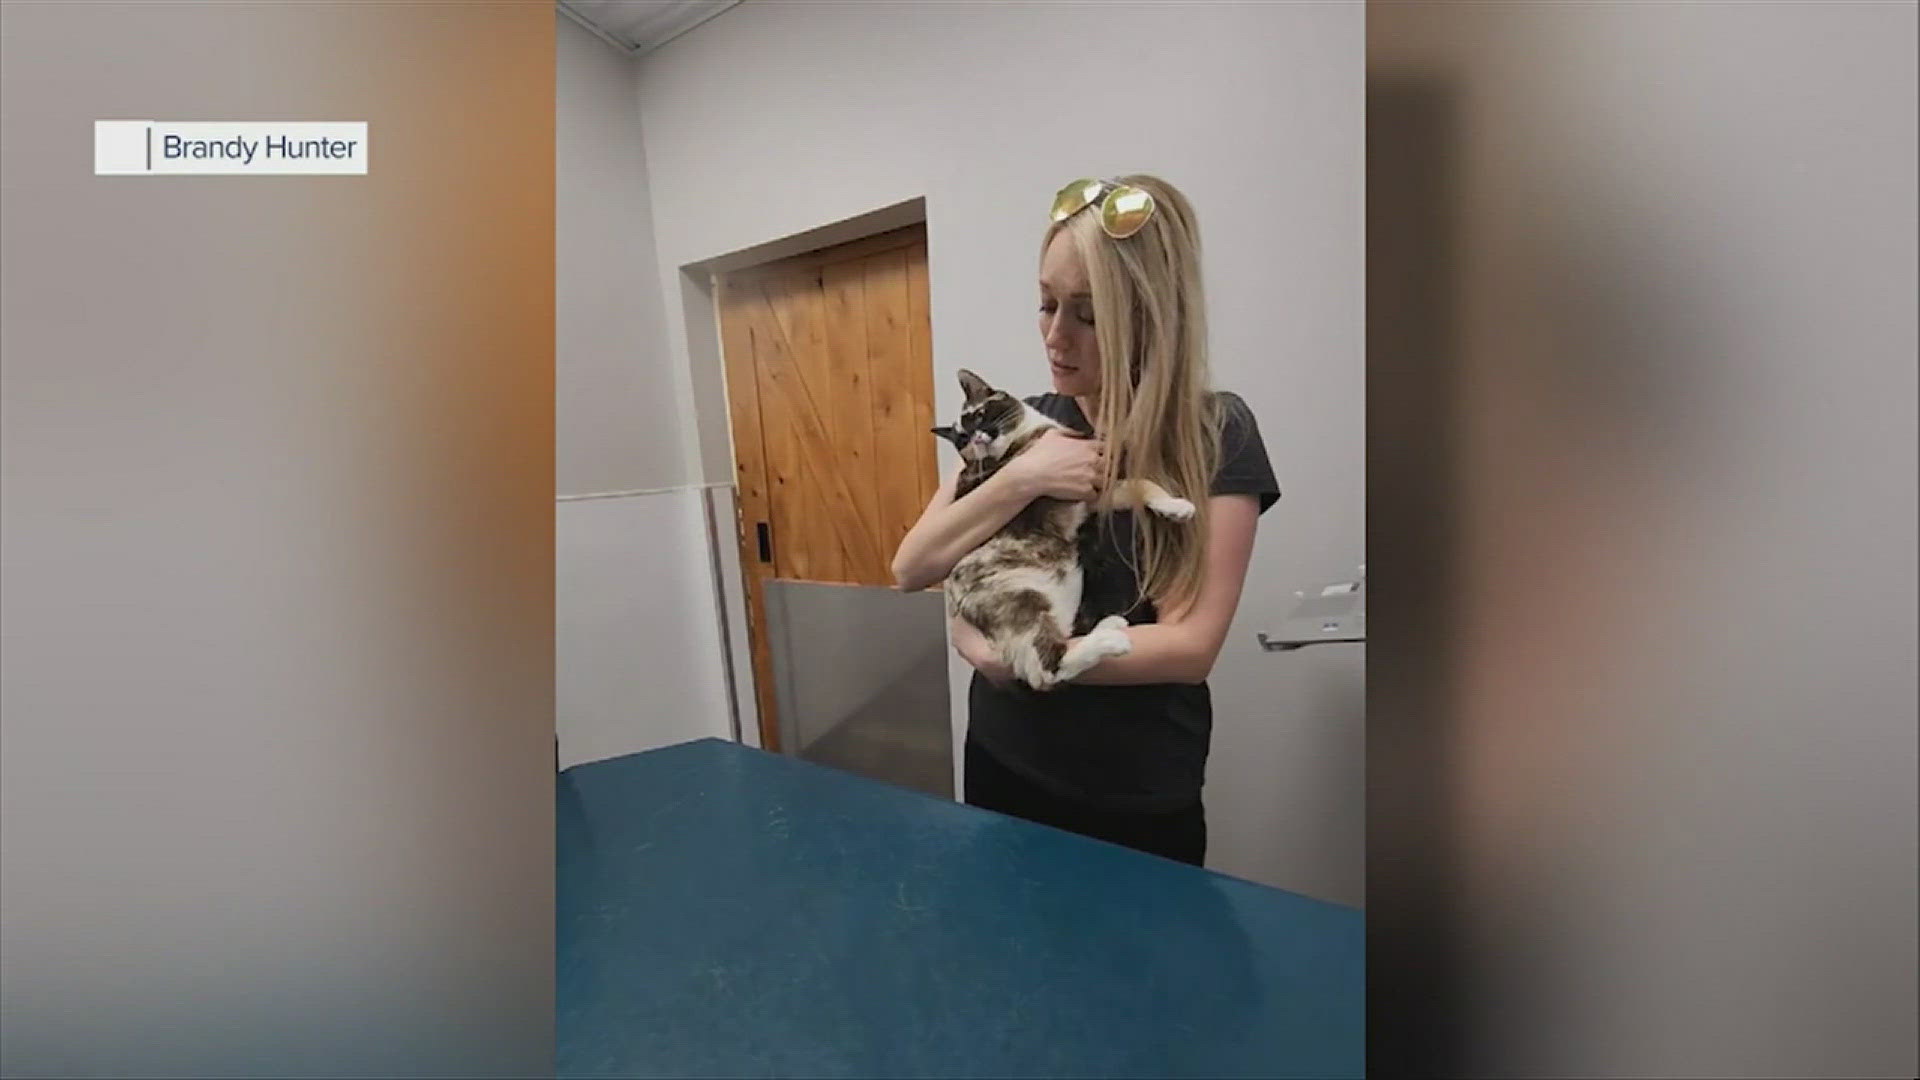 A Utah family reunites with their cat, who was accidentally mailed off in an Amazon box and stayed inside for nearly a week.